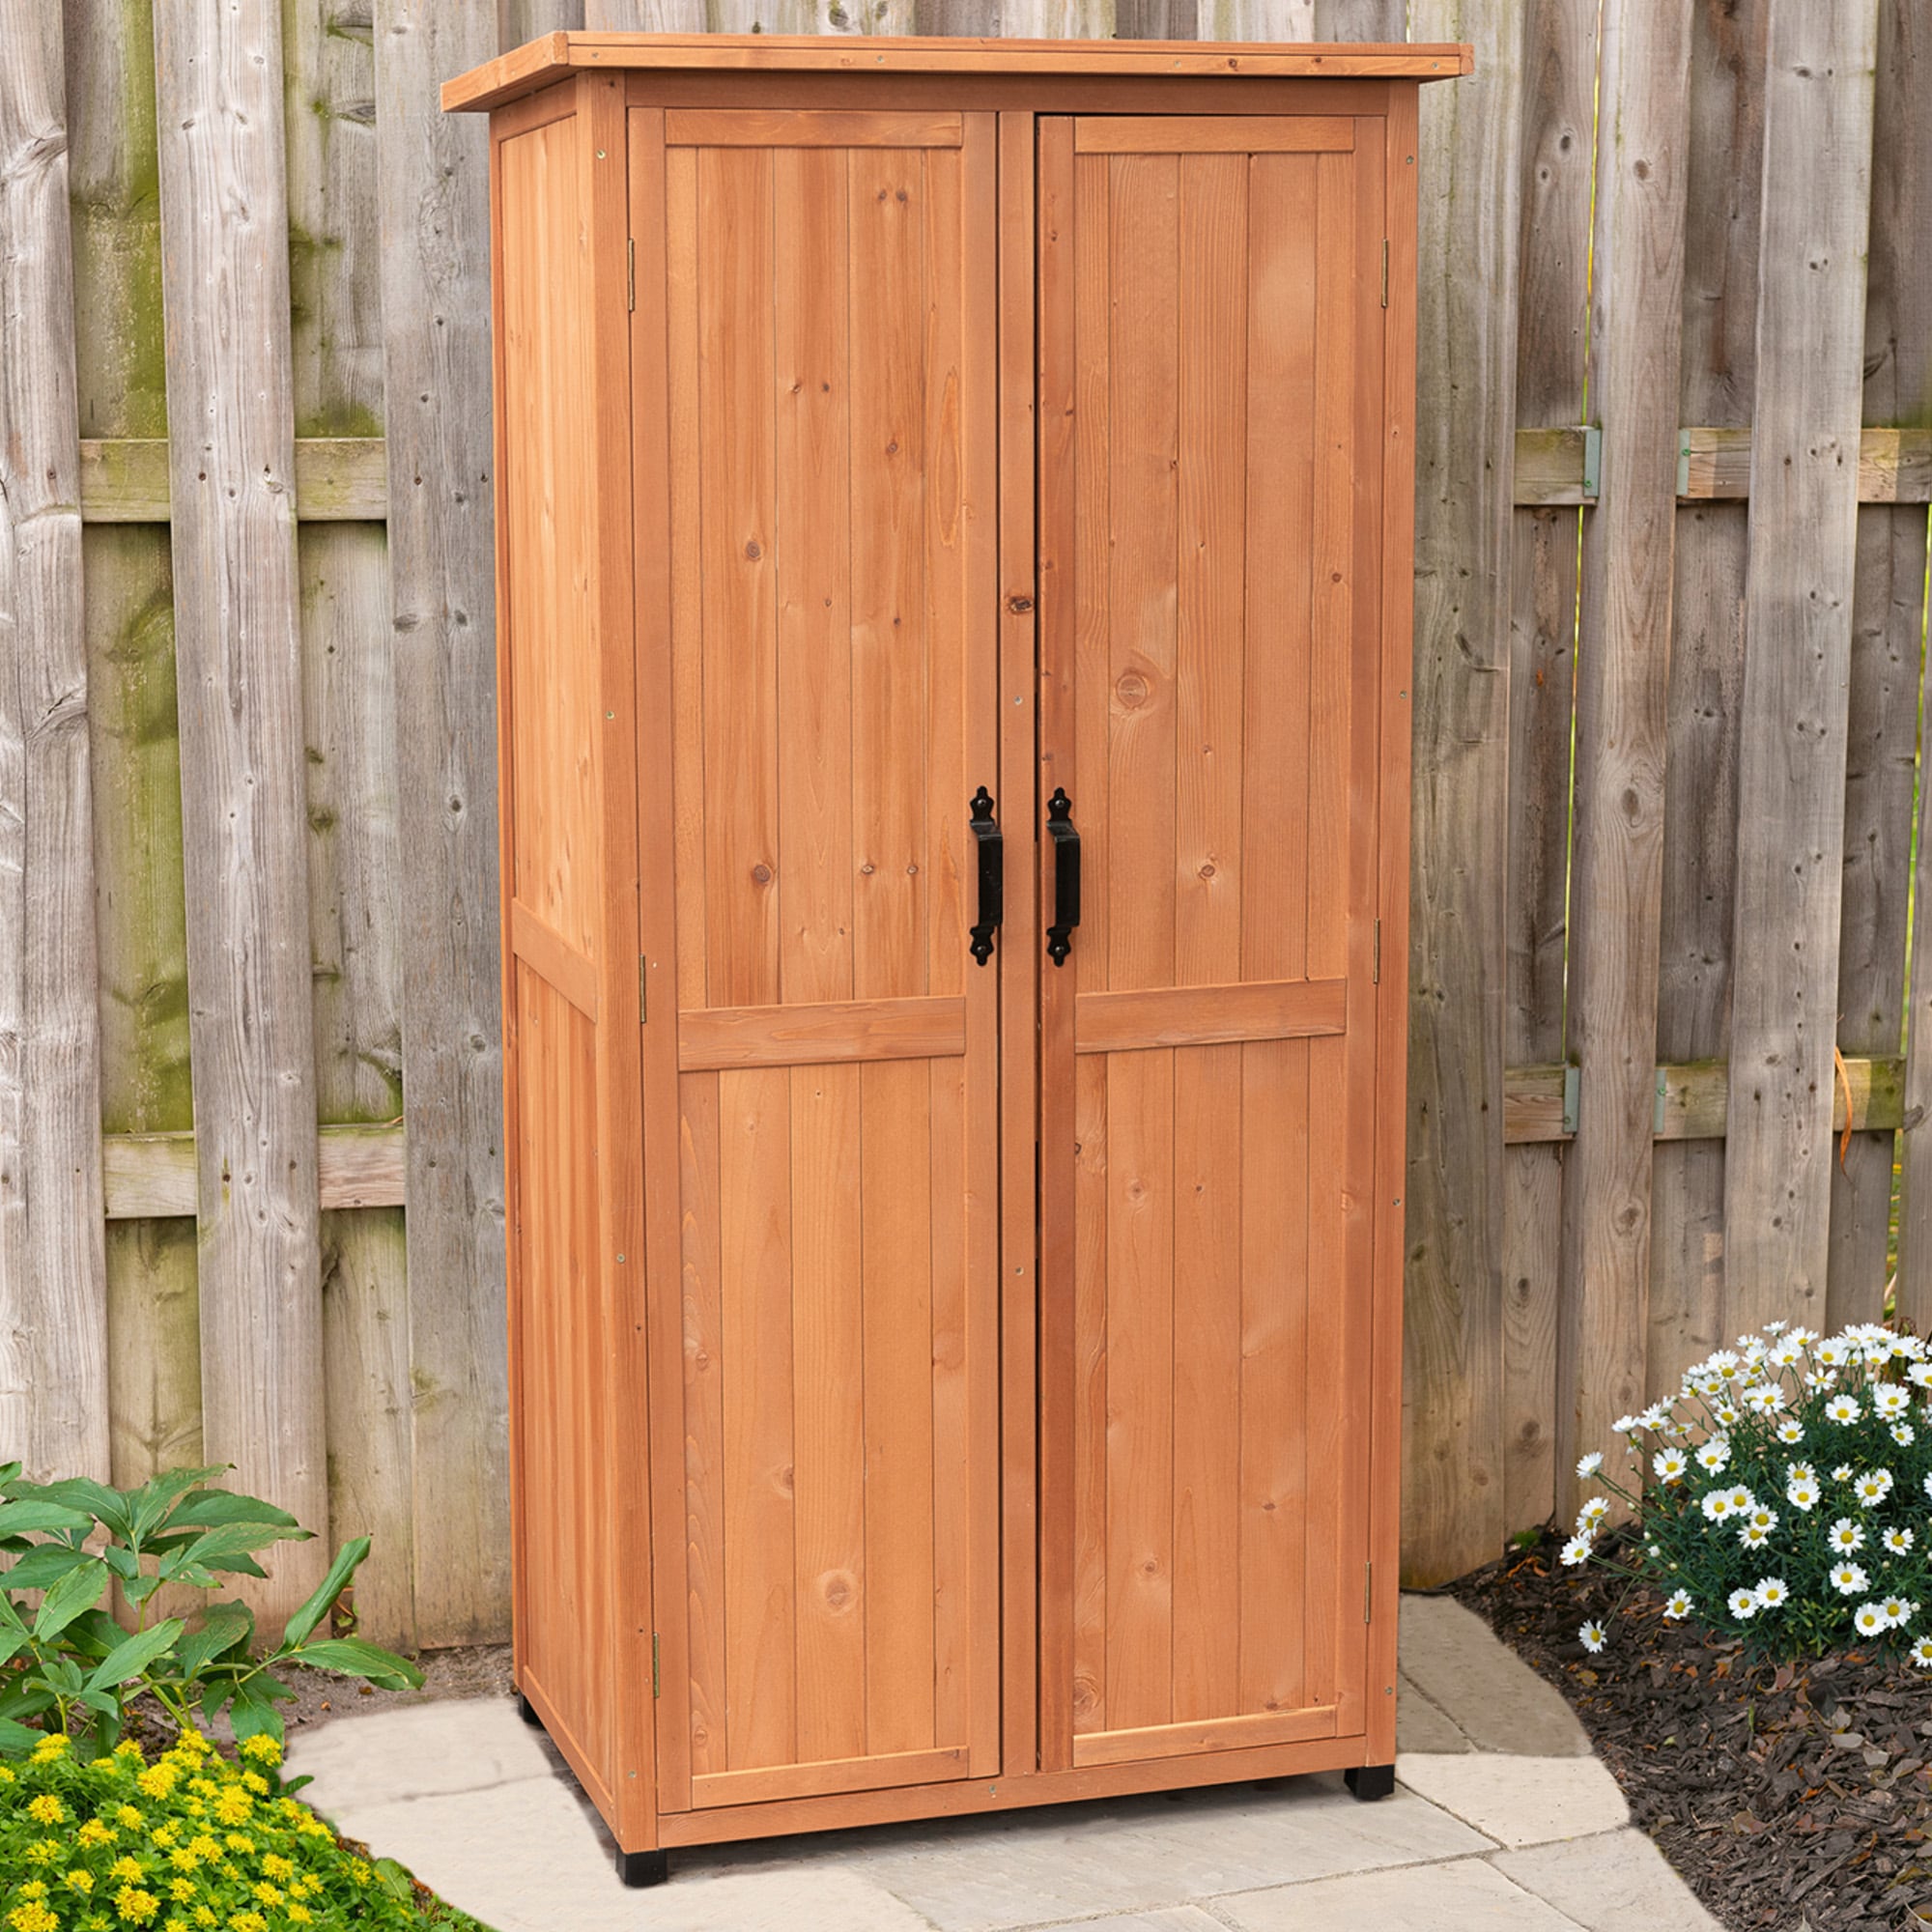 Wooden outdoor garden cabinet utility storage tools XXL shelf box shed flat roof 